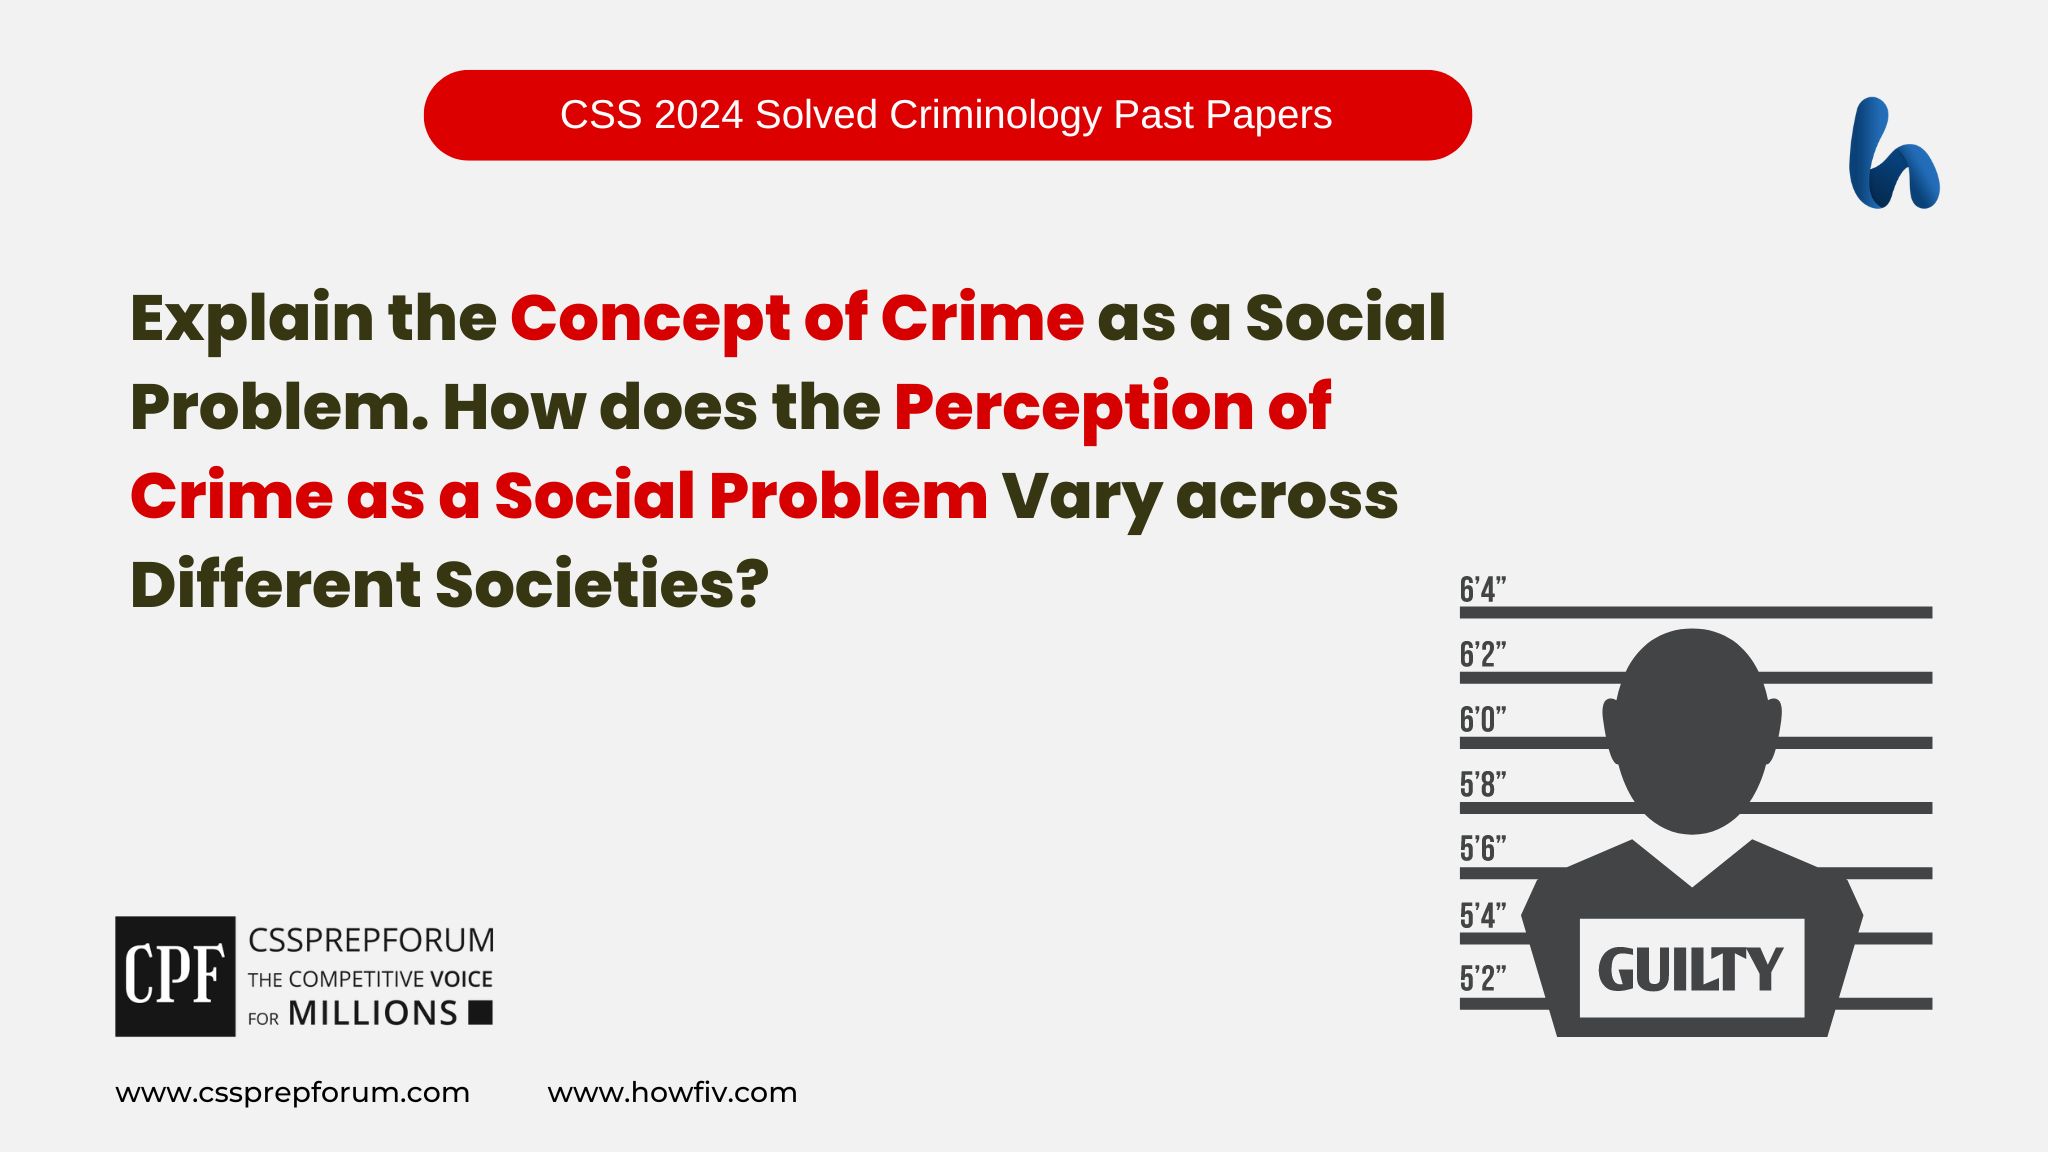 Explain the Concept of Crime as a Social Problem. How does the Perception of Crime as a Social Problem Vary across Different Societies